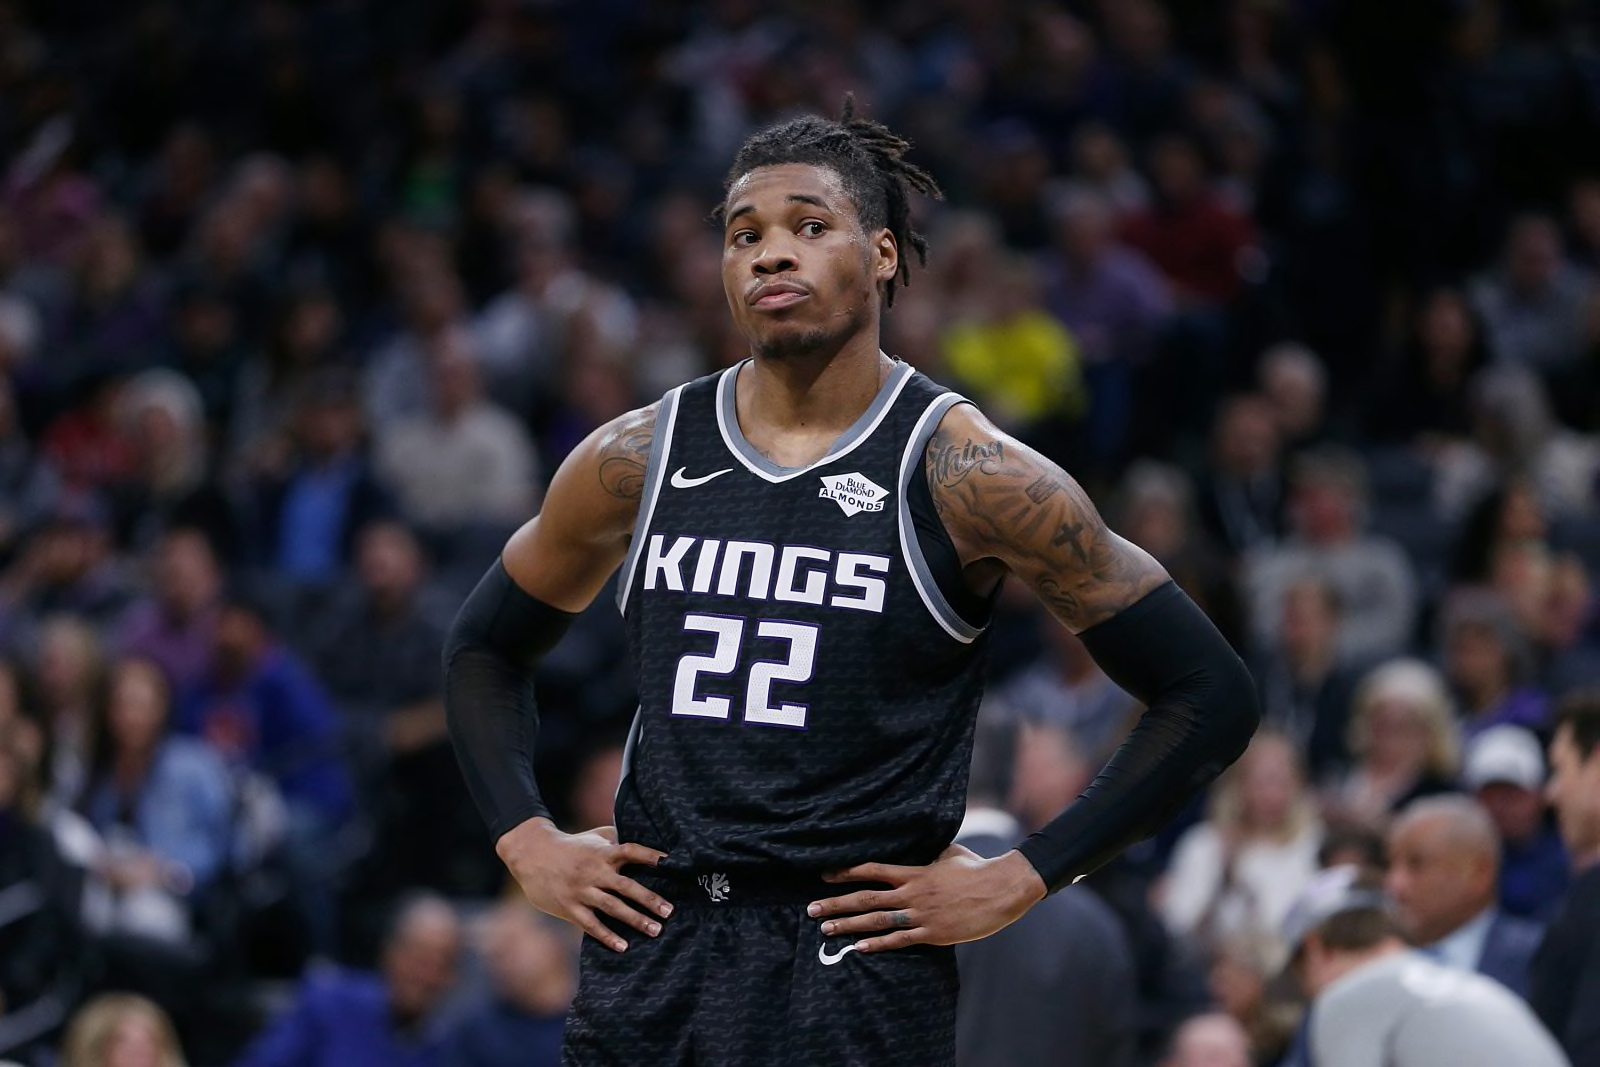 Sacramento Kings: Which Jersey/Color Scheme Is The Best? - Page 2